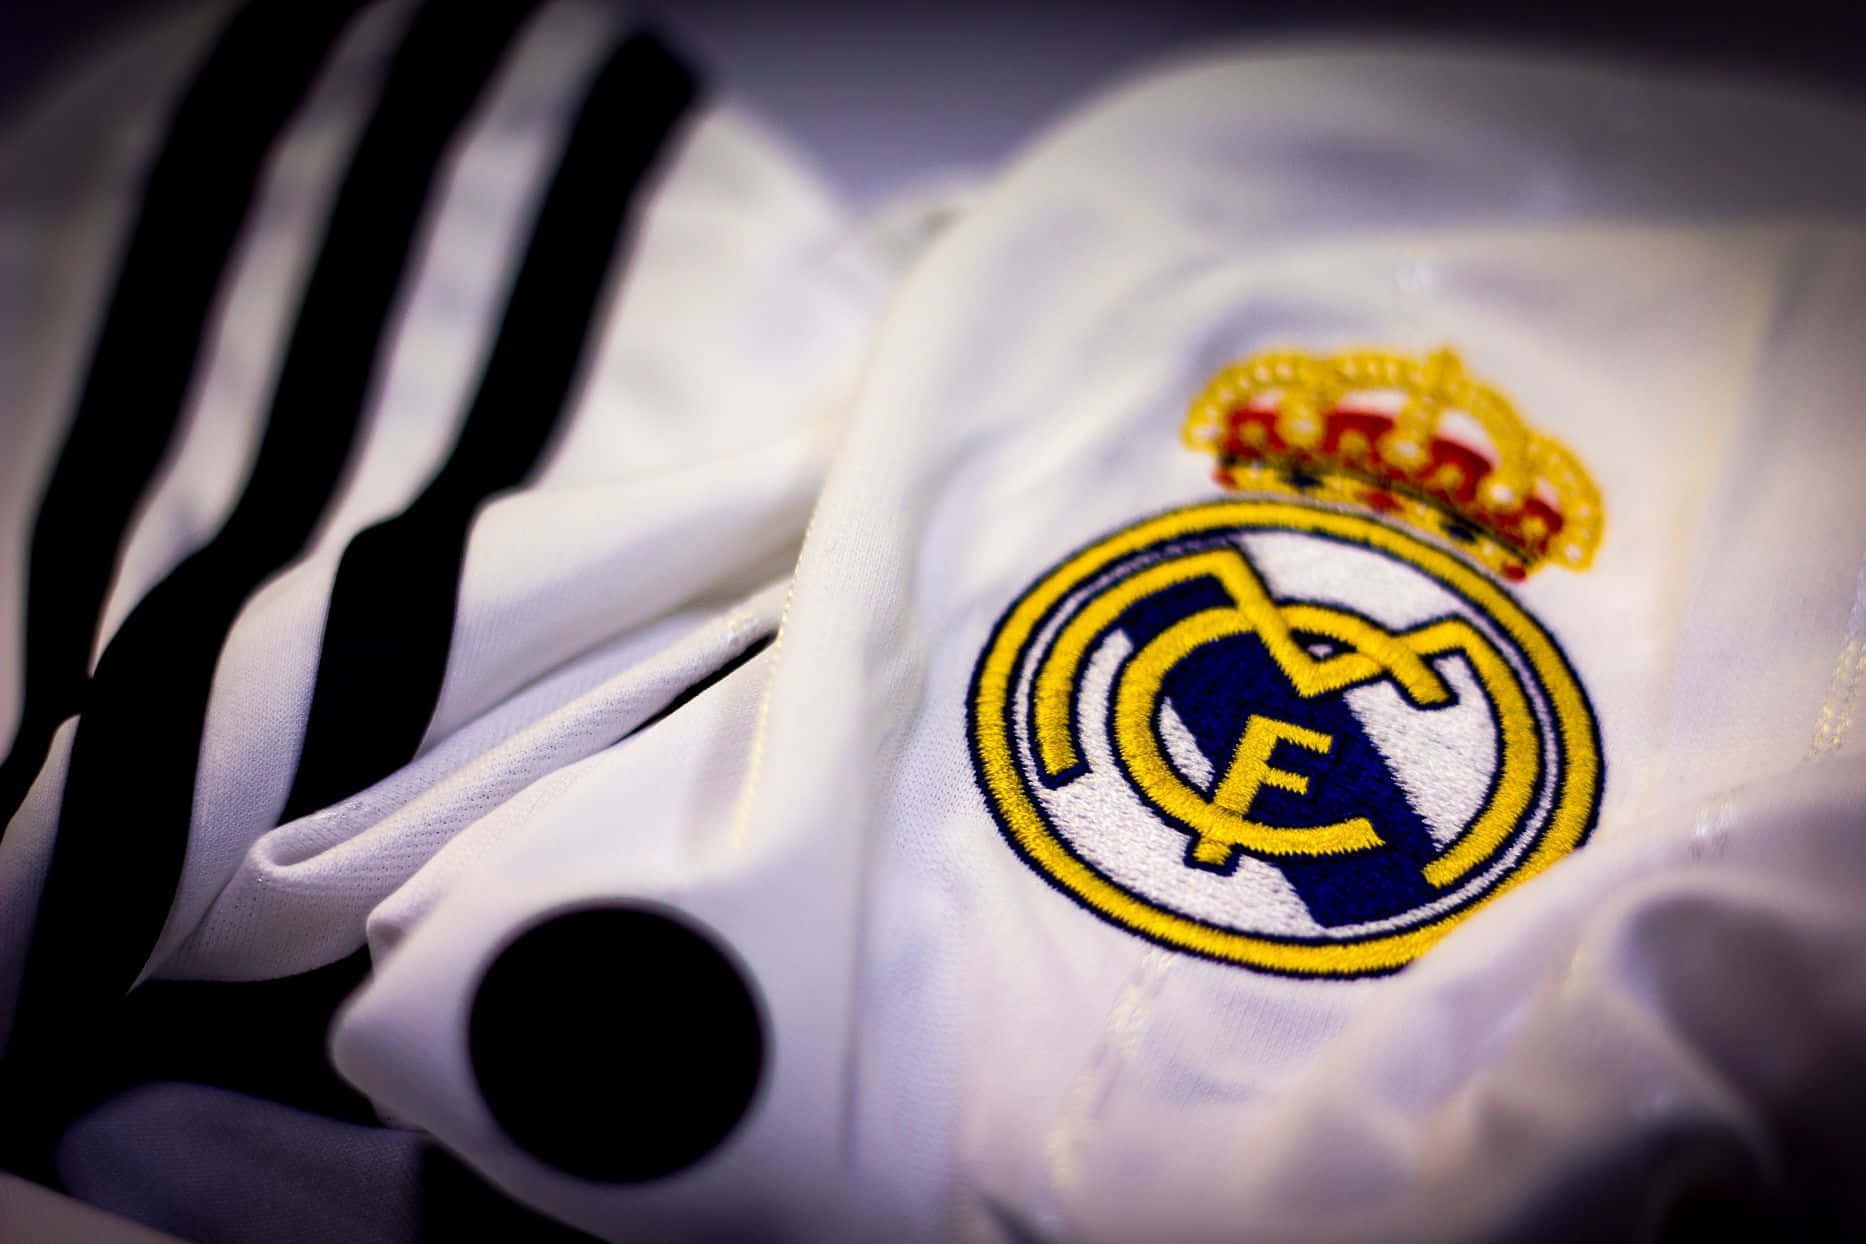 Real Madrid -- Home of the Champions